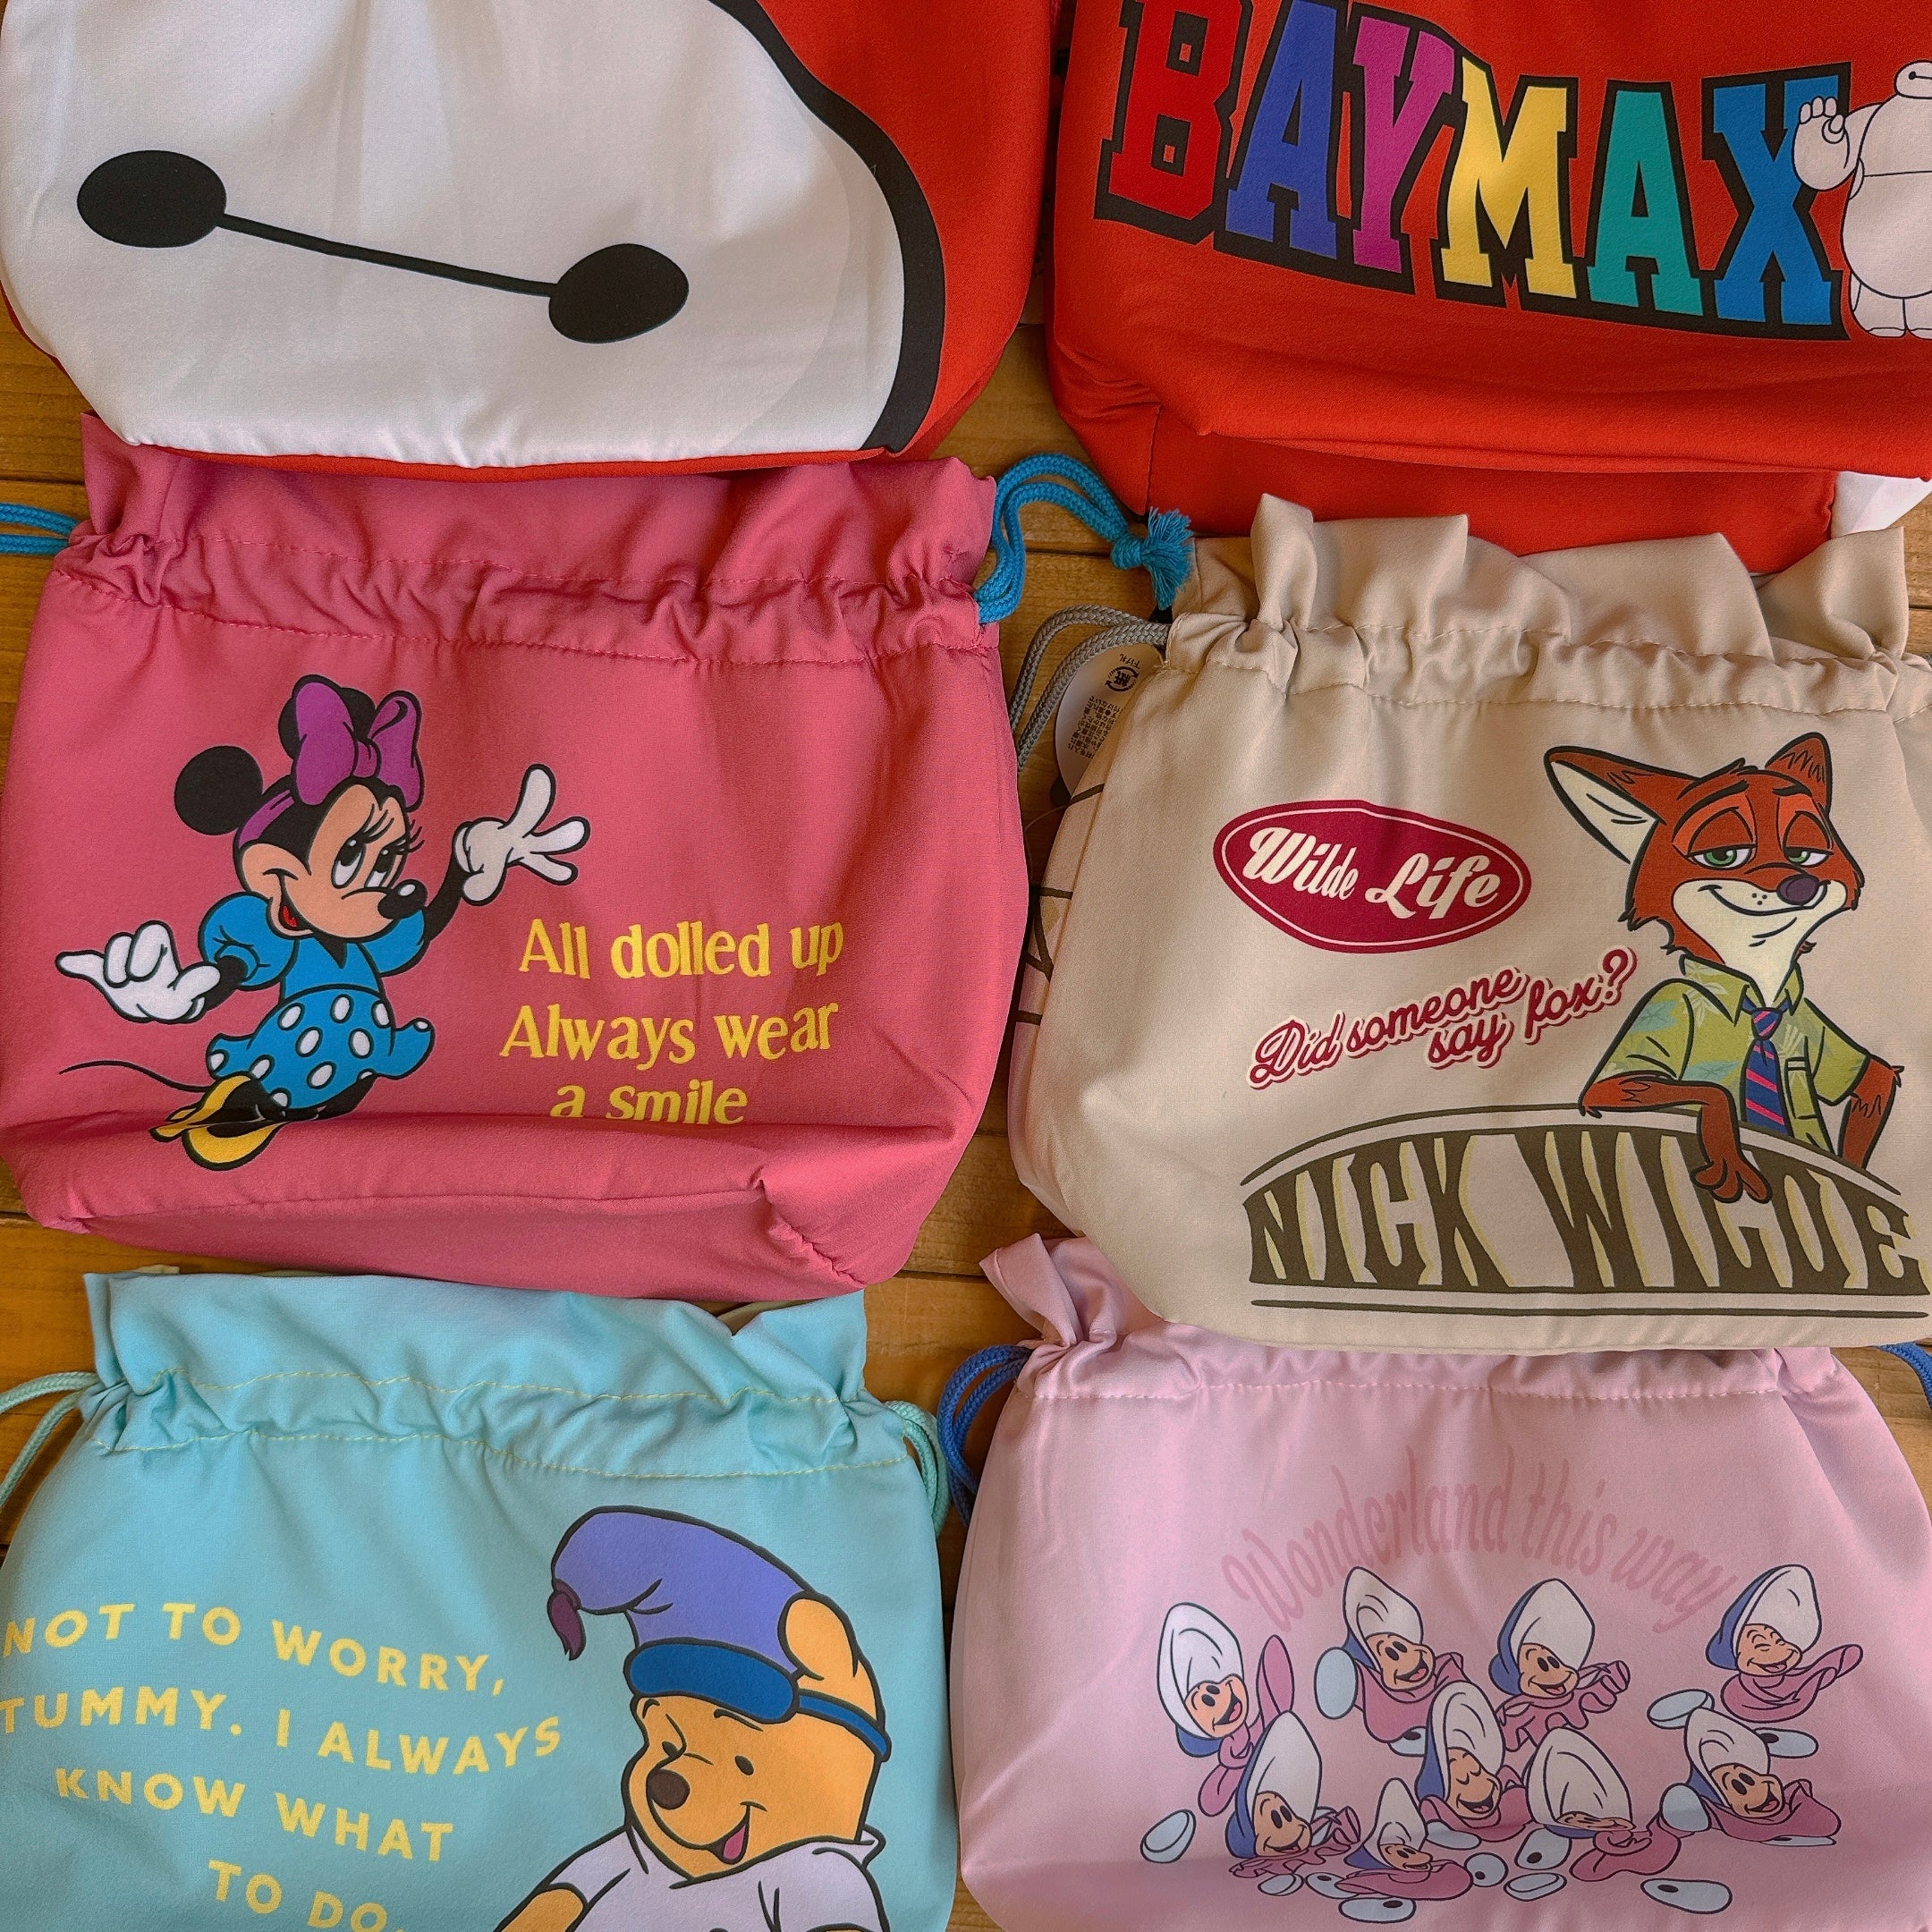 Pre-order: 5 types of Disney insulated lunch pouches. Shipment scheduled for April 9th.